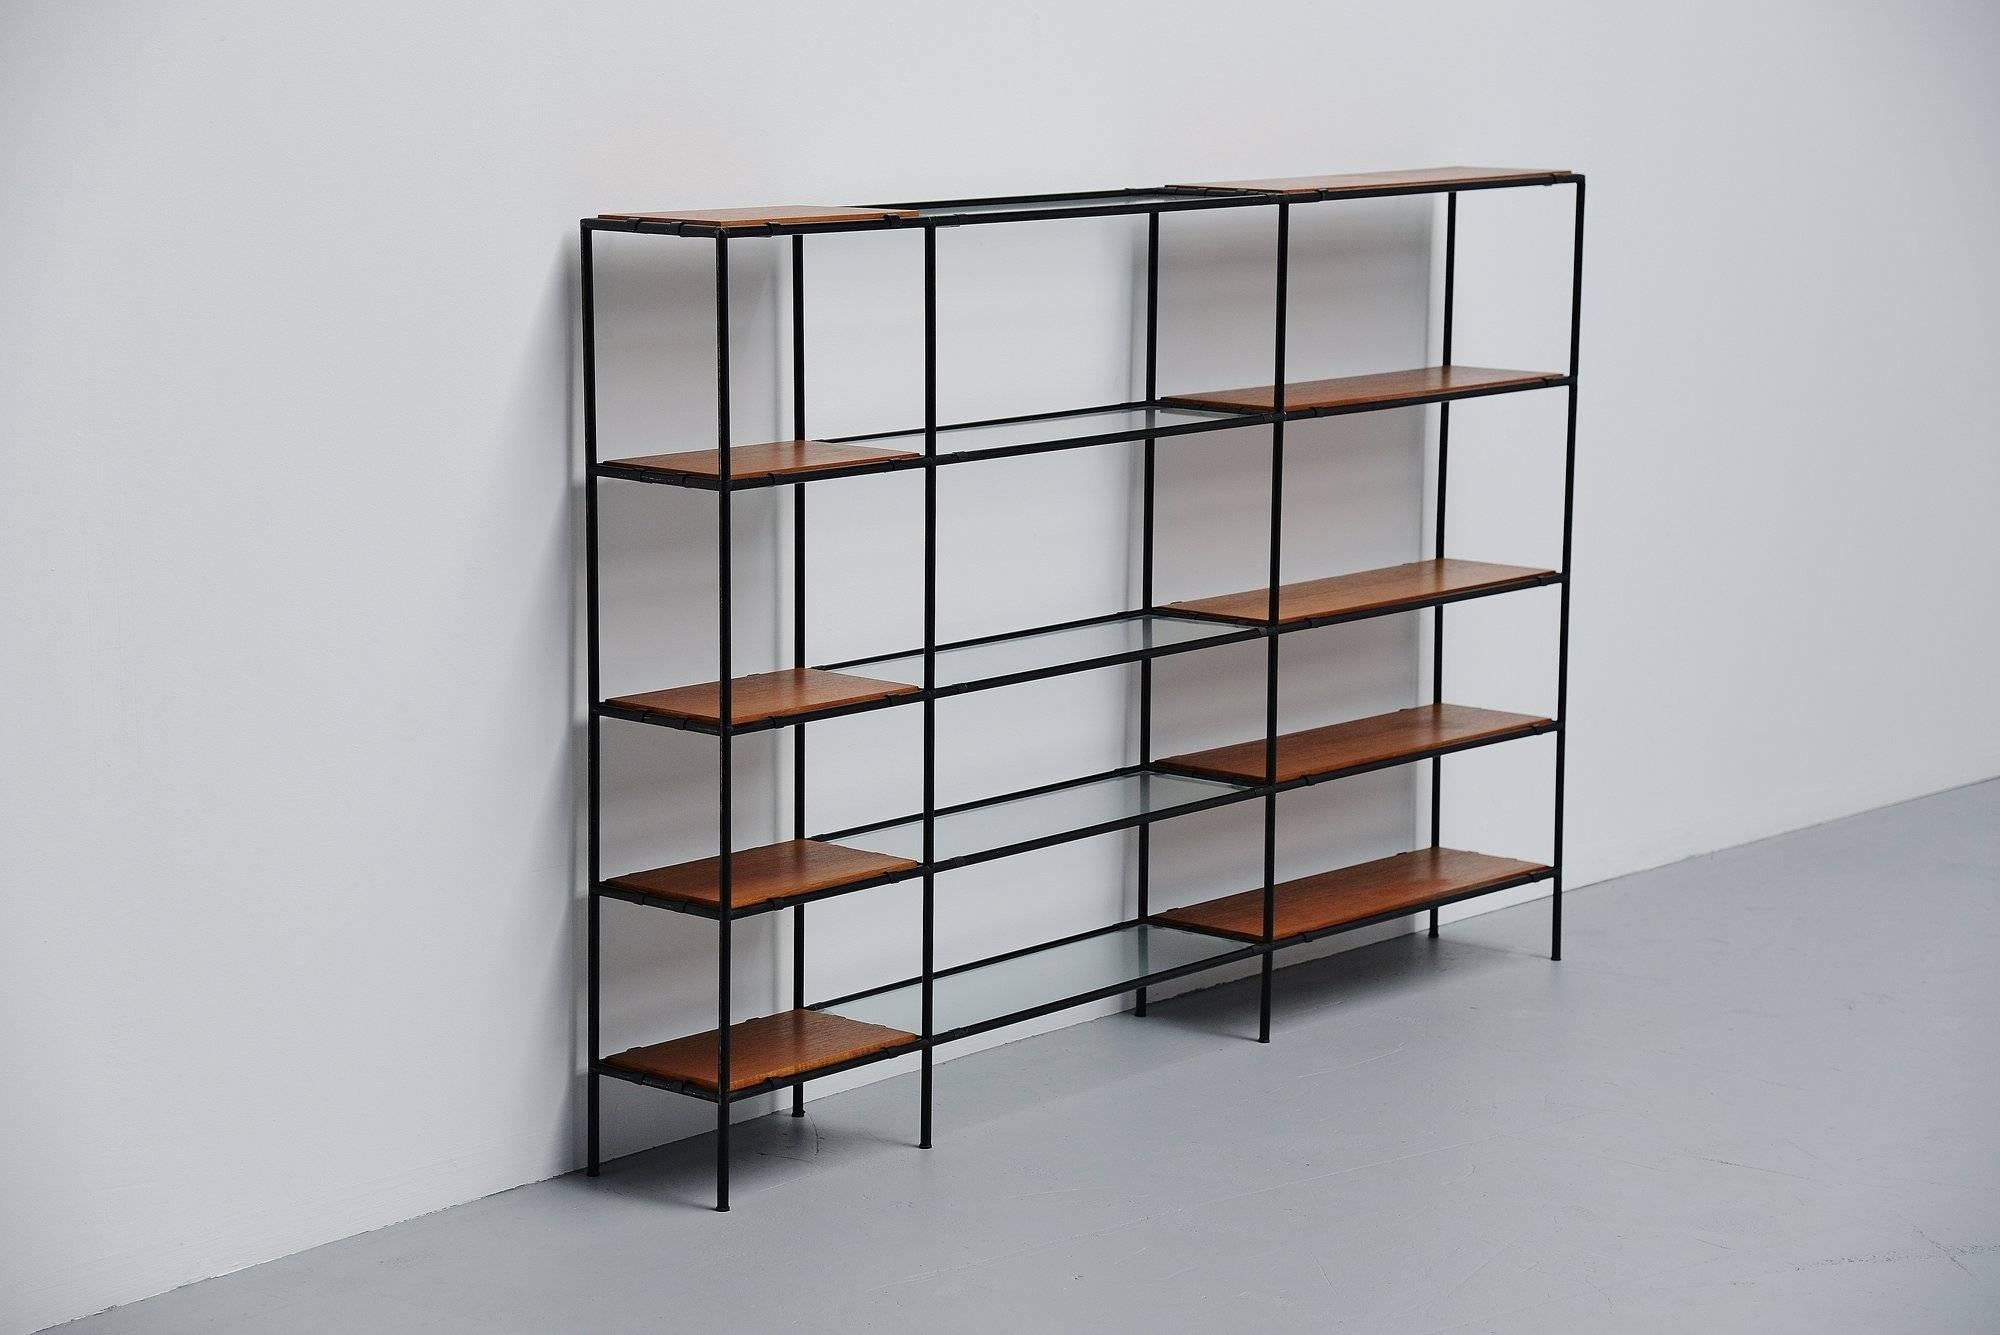 Nice small bookcase unit from the Abstracta series, designed by Poul Cadovius for Royal System, Denmark 1960. The cabinet is made of black lacquered tubular metal parts and it has teak wooden and glass shelves. This can be used as bookcase or